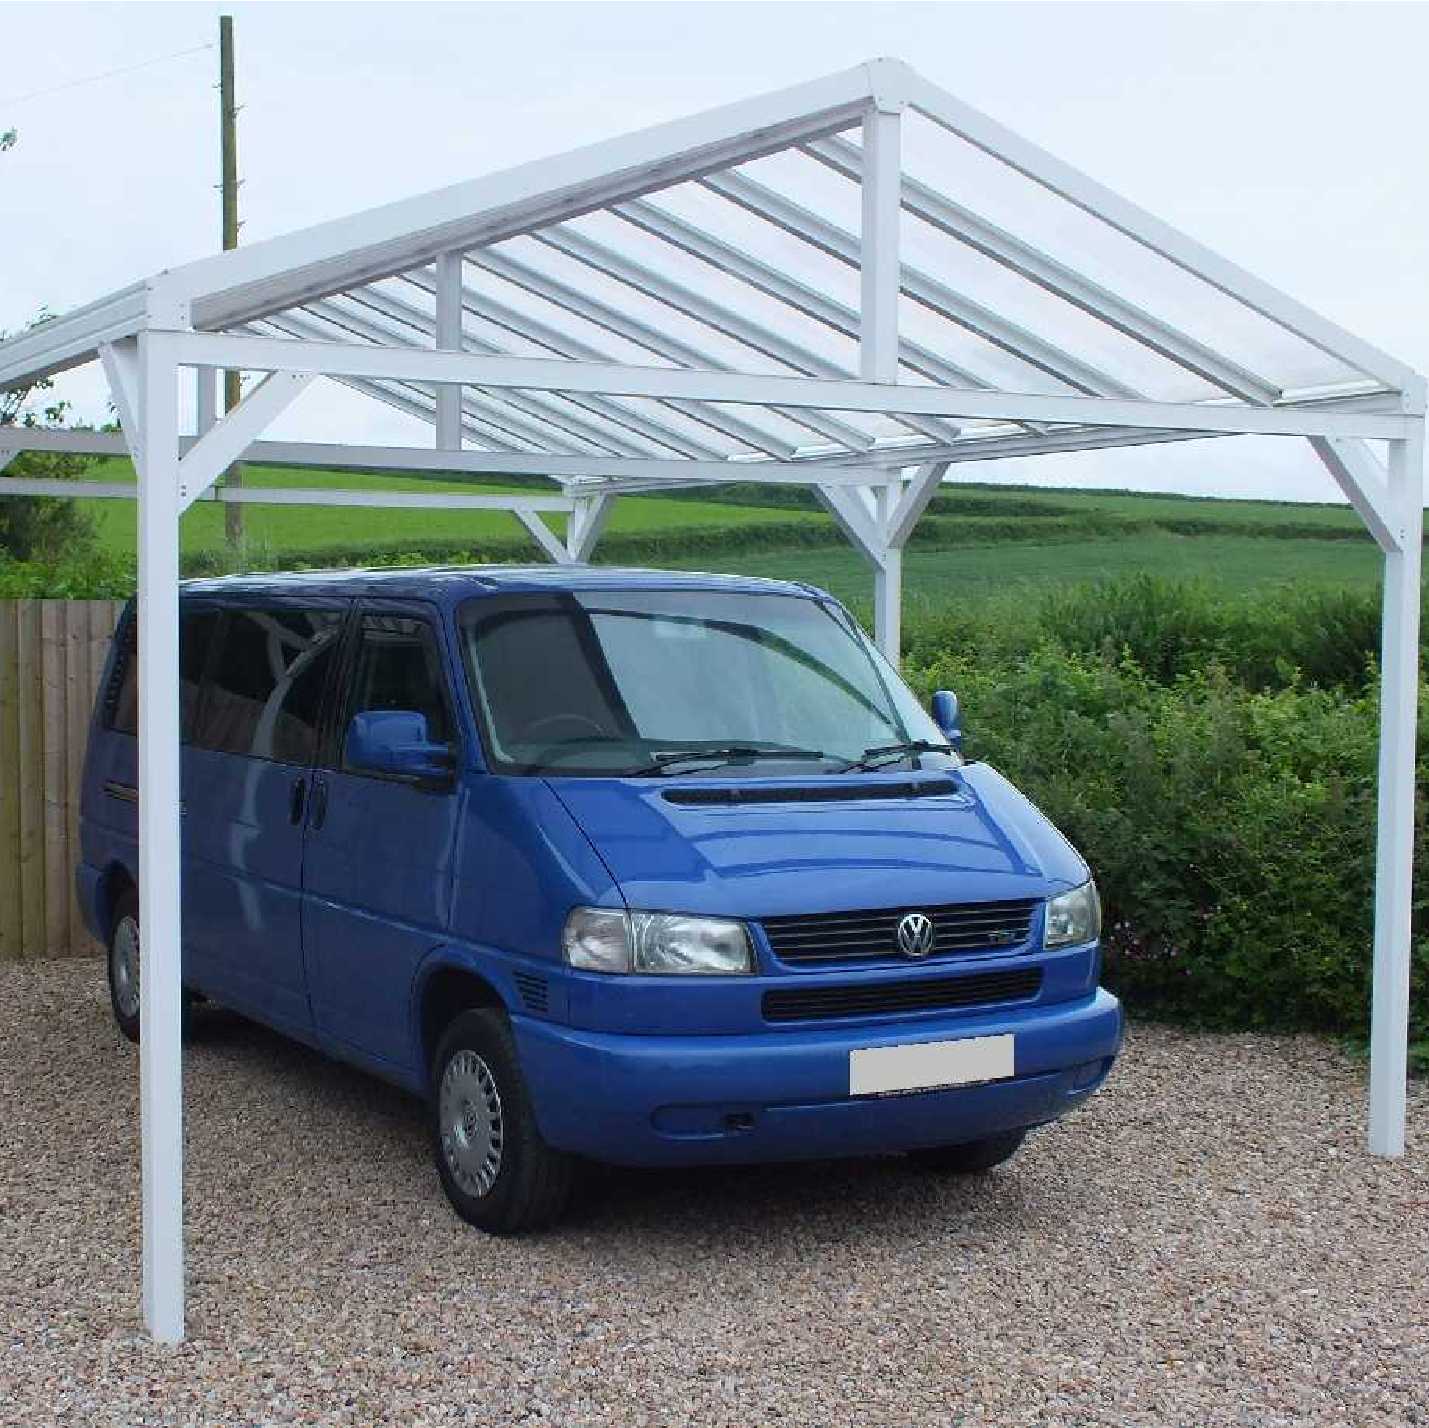 Omega Smart Free-Standing, White Gable-Roof (type 1) Canopy with 16mm Polycarbonate Glazing - 6.3m (W) x 4.0m (P), (8) Supporting Posts